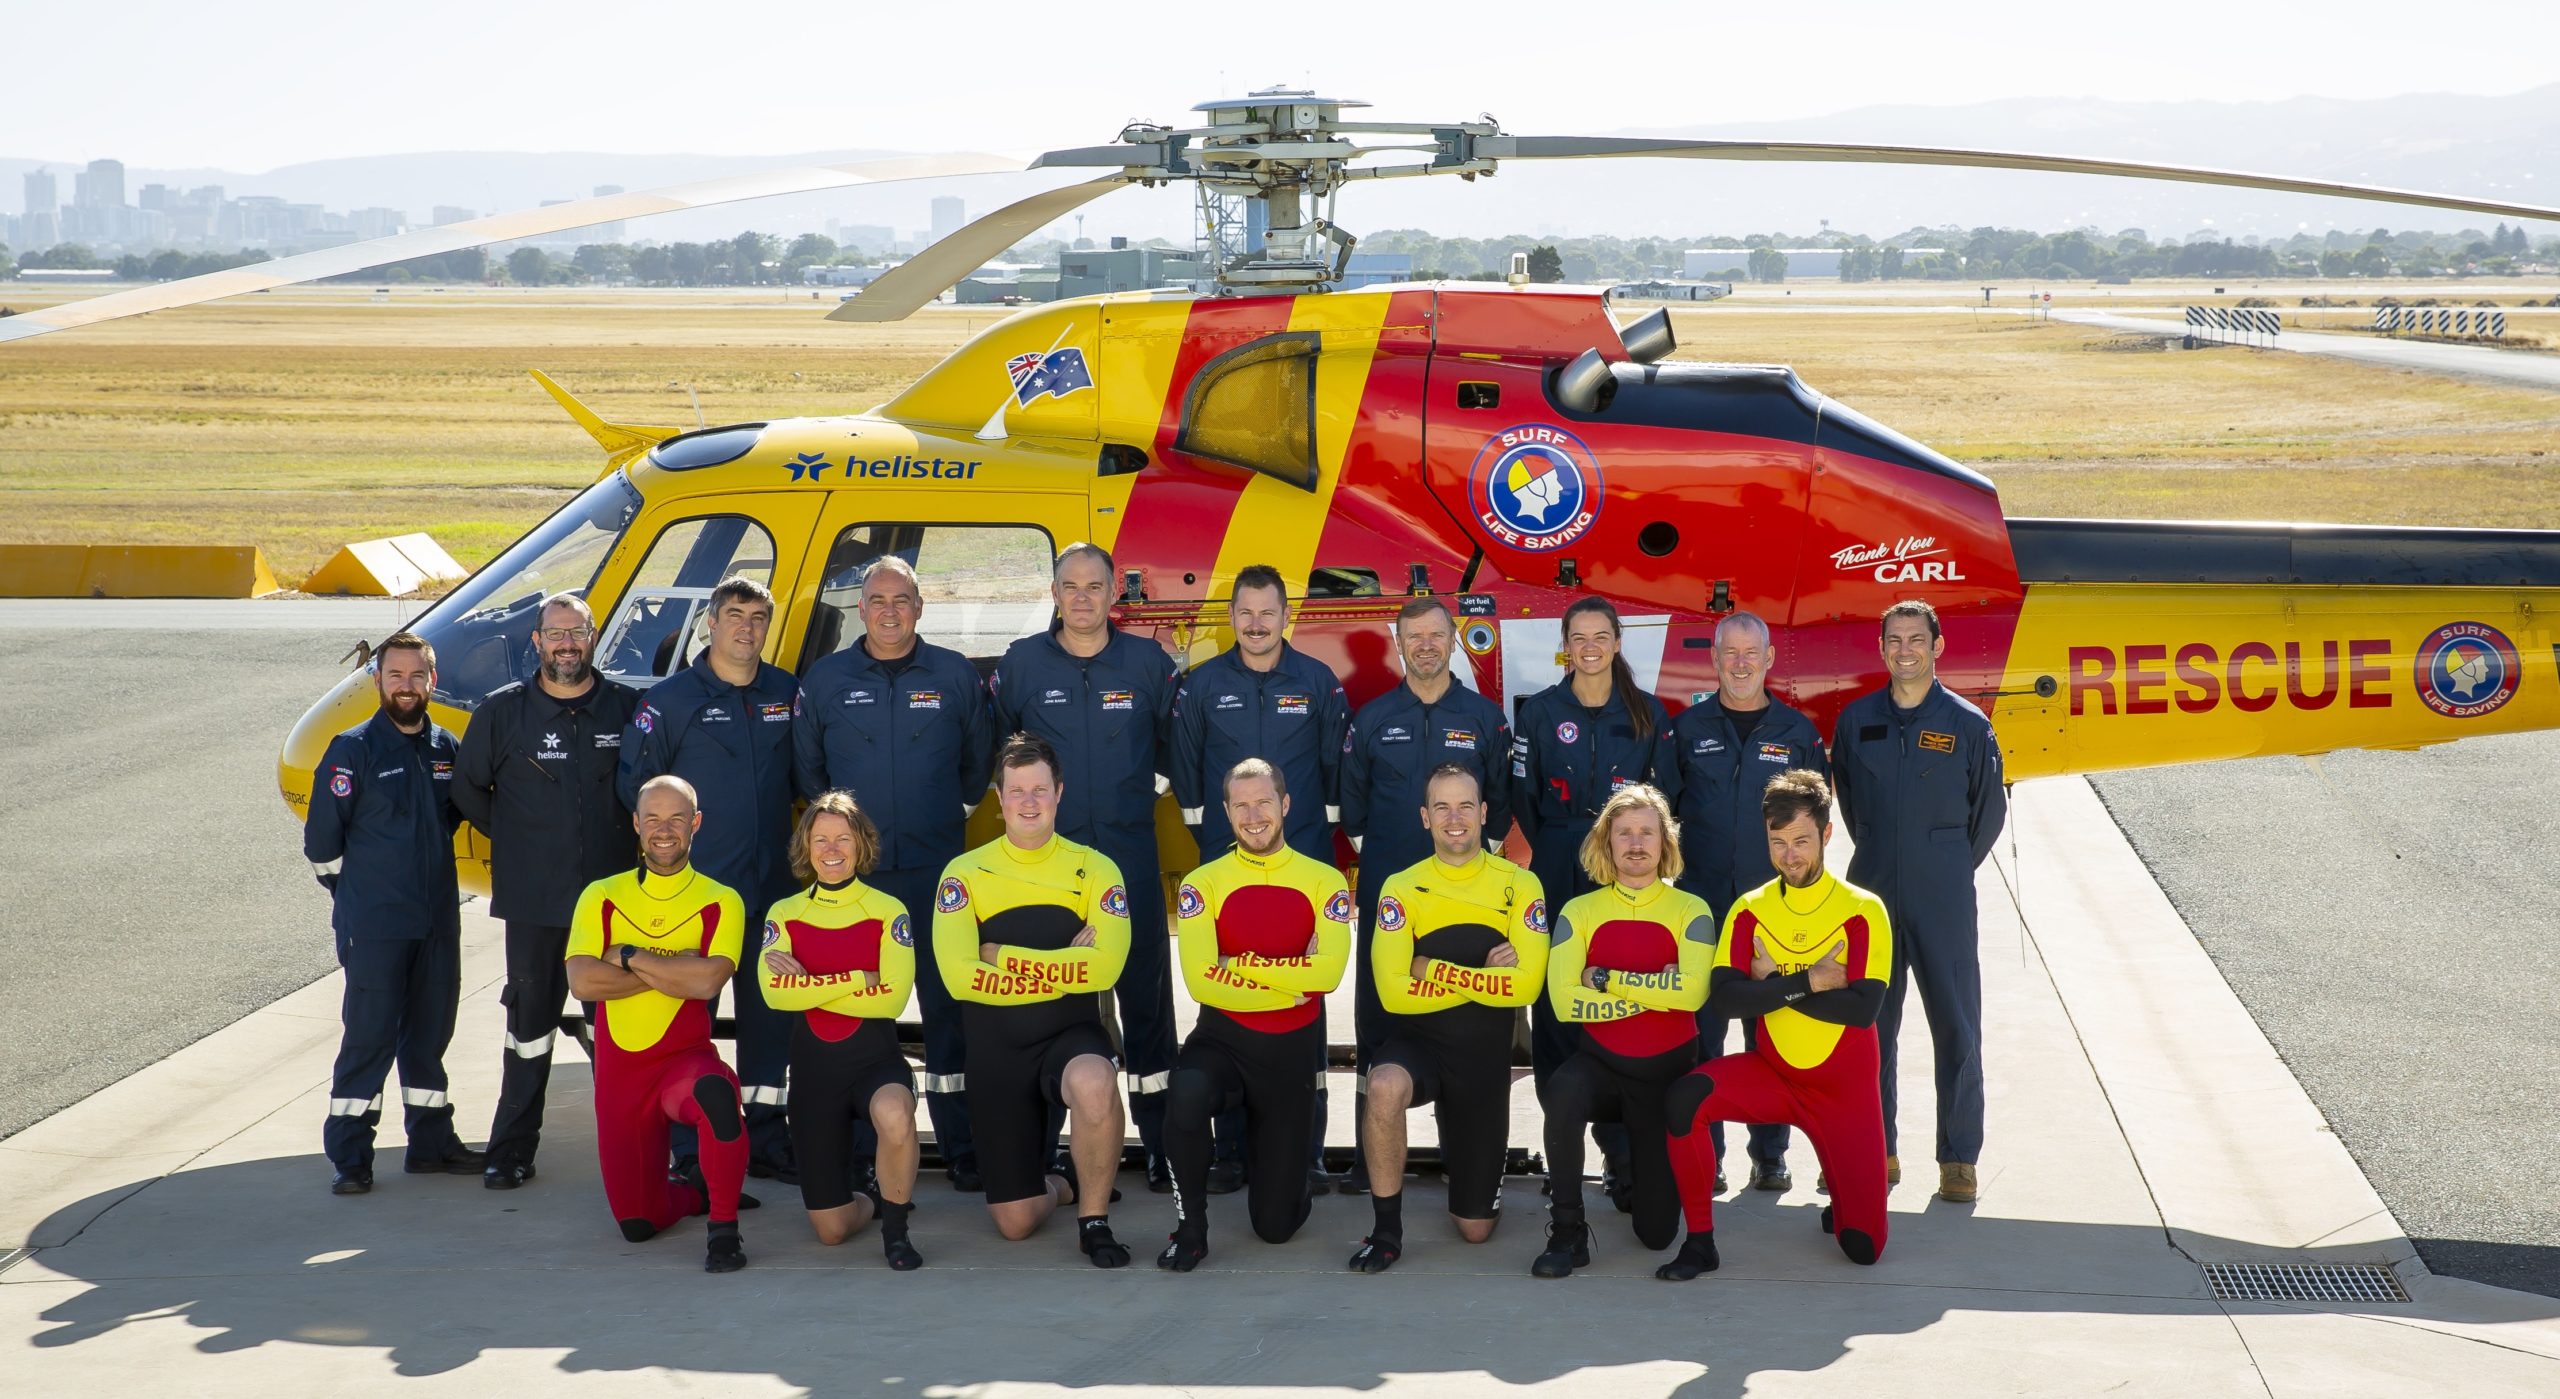 Crewing with helicopter rescue for 43 years